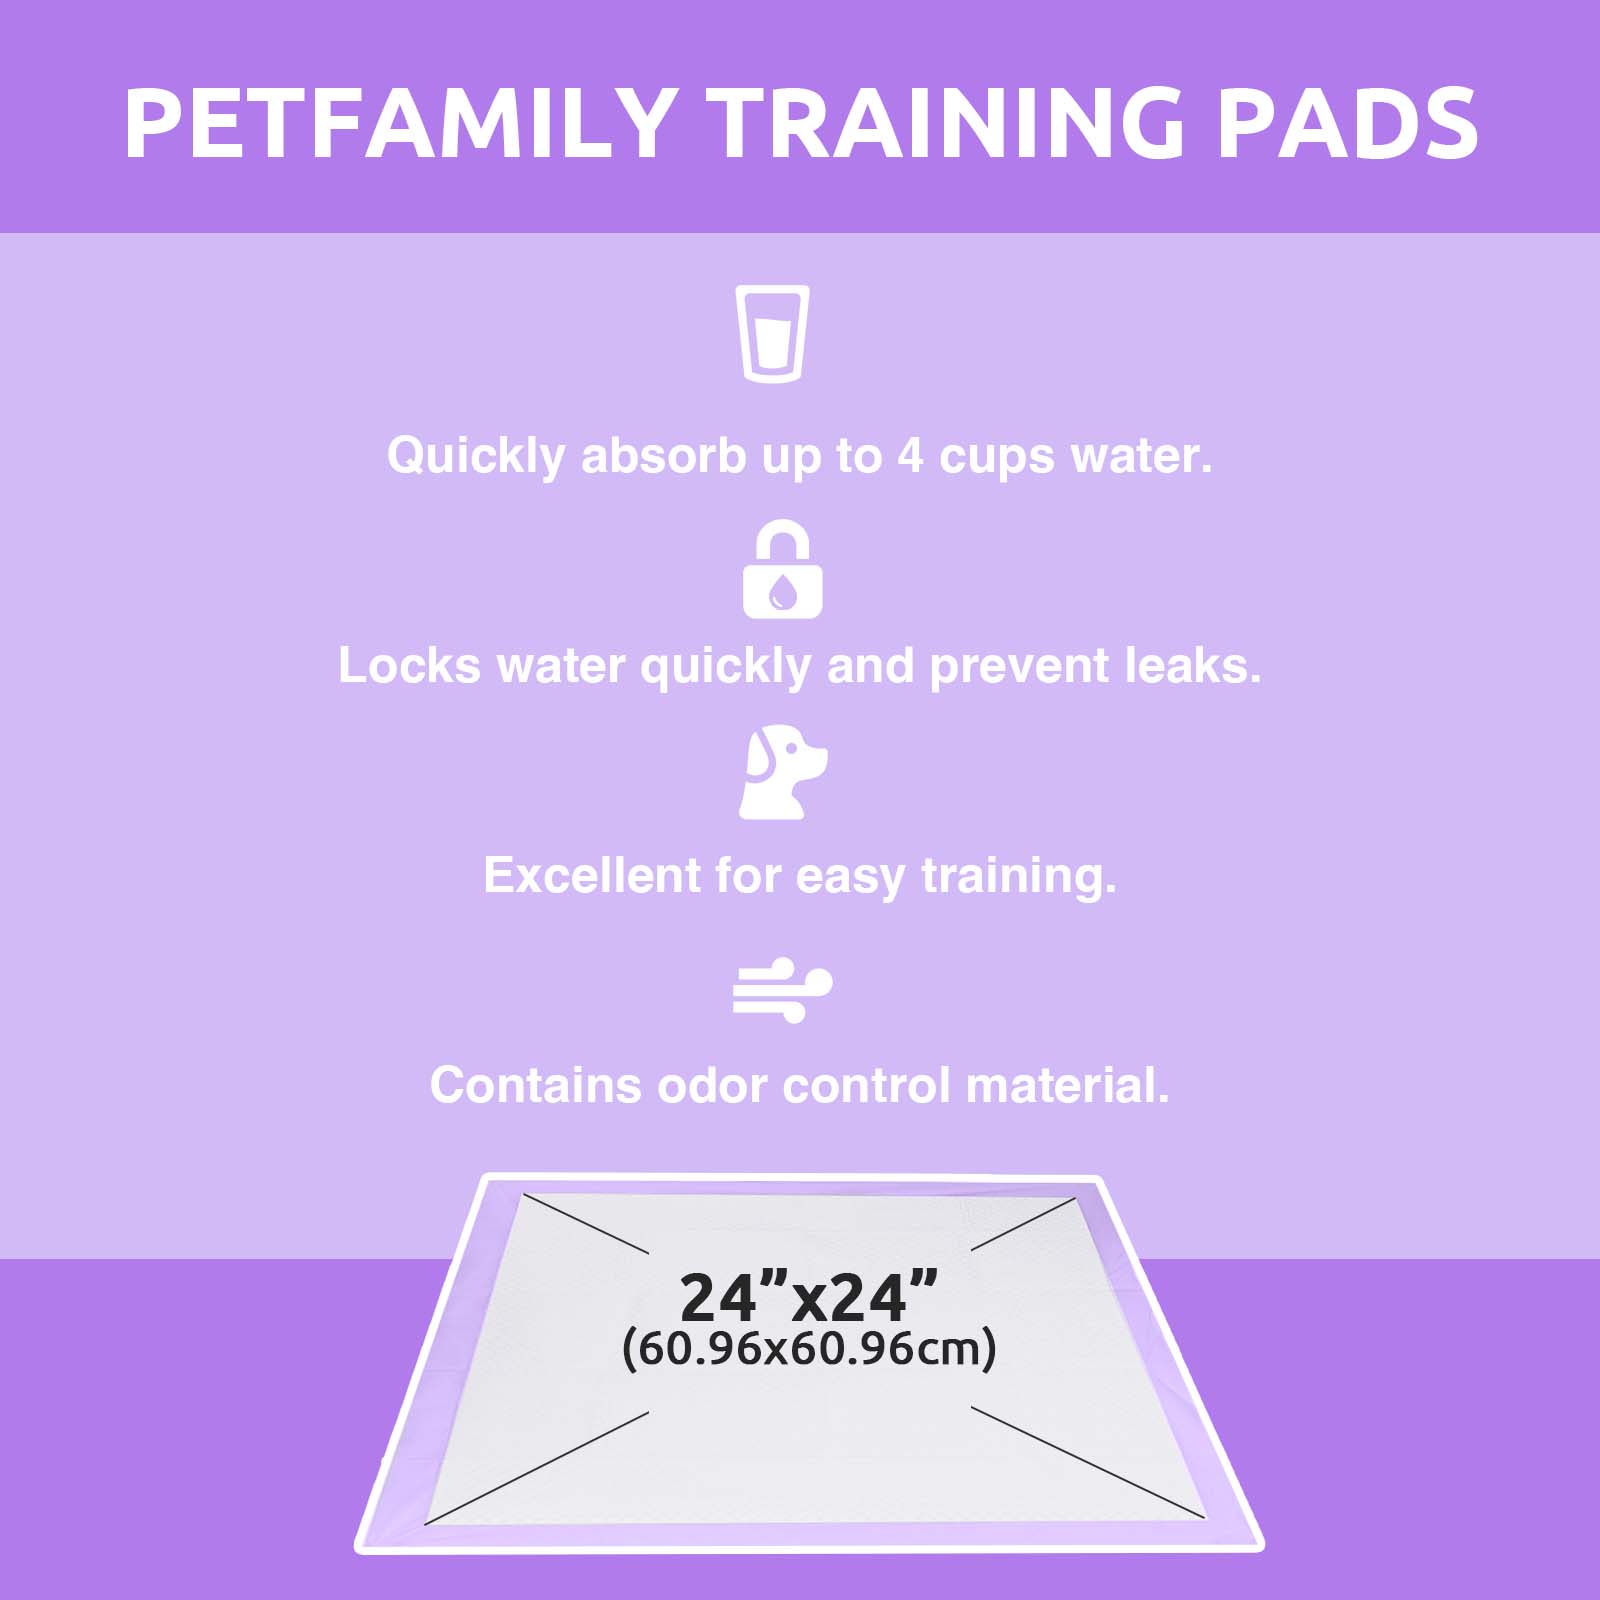 Dog Training Pads 24" x 24" 50 Pieces, Lavender Scent - Quick Drying and Ultra Absorbent